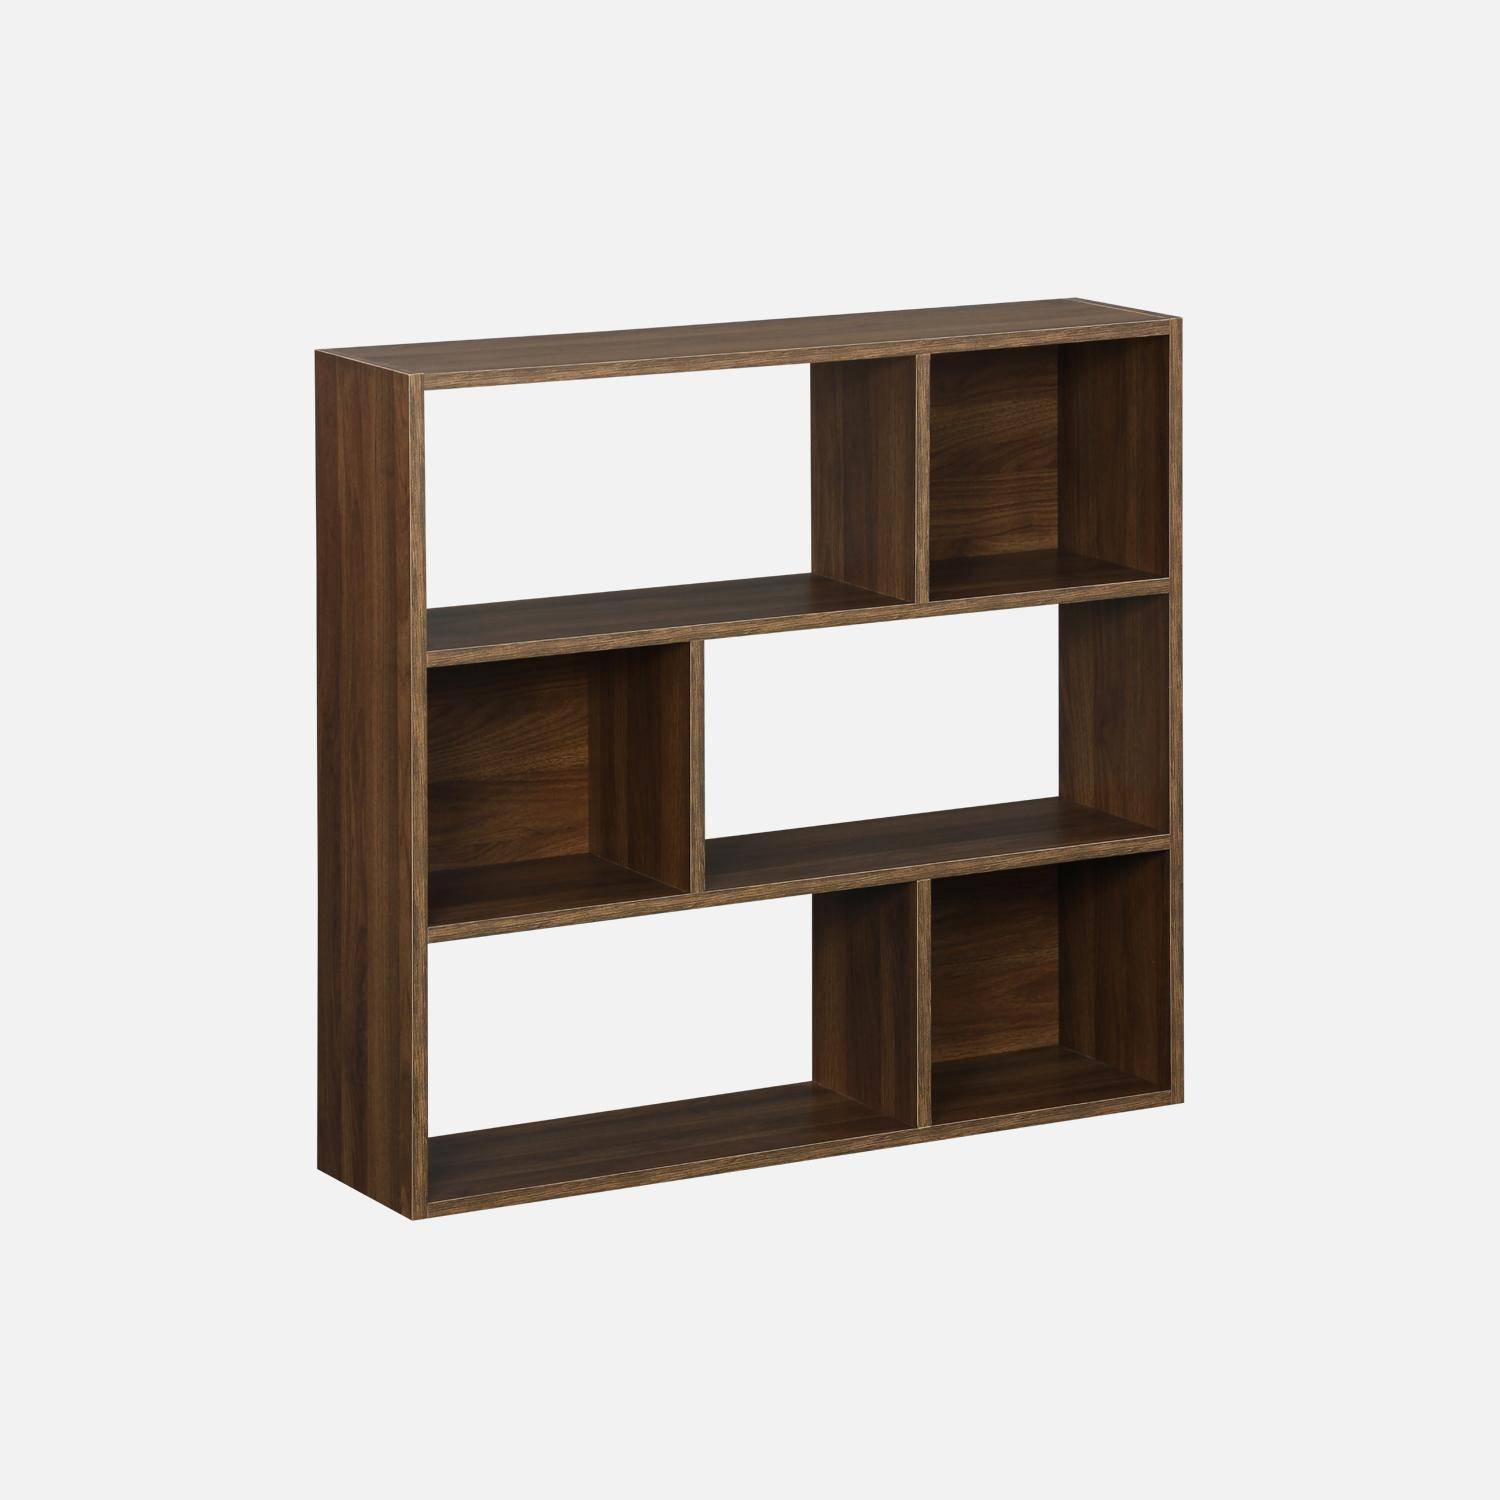 3-shelf bookcase with 6 compartments, wood, L83xW23xH80cm, Pieter Photo3